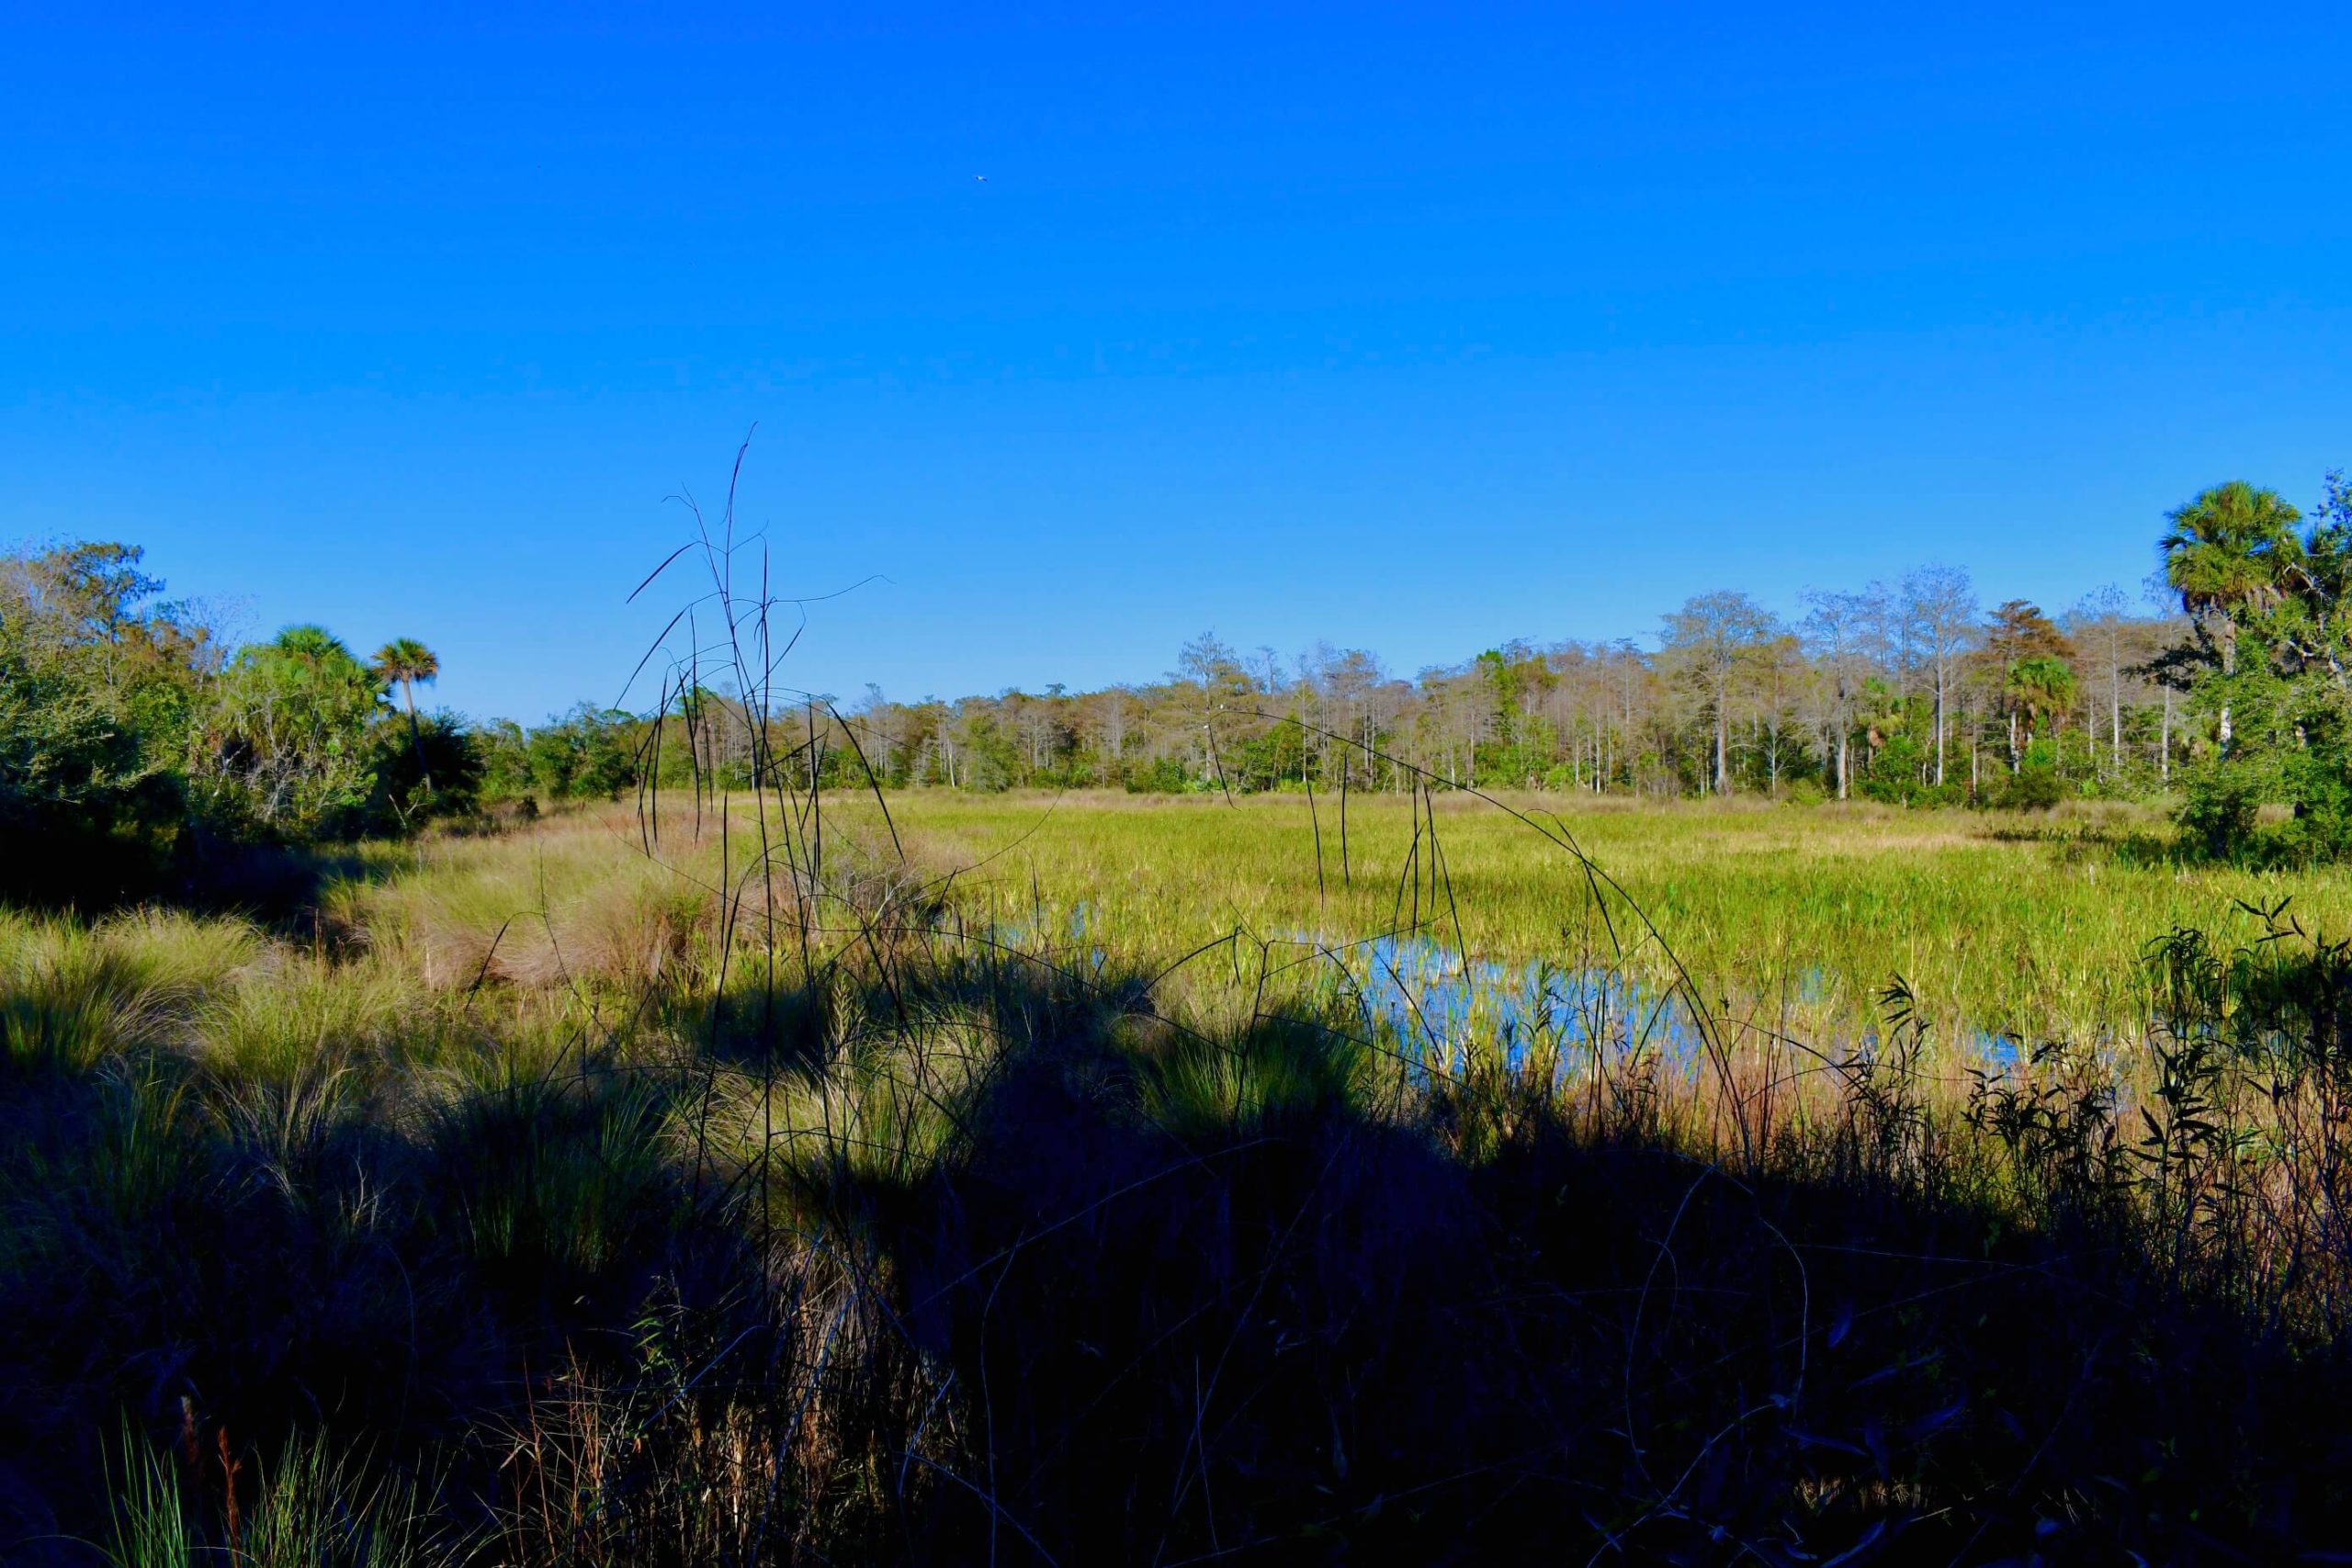 800 acres of preserves and bird sanctuaries in Winding Cypress for you to enjoy